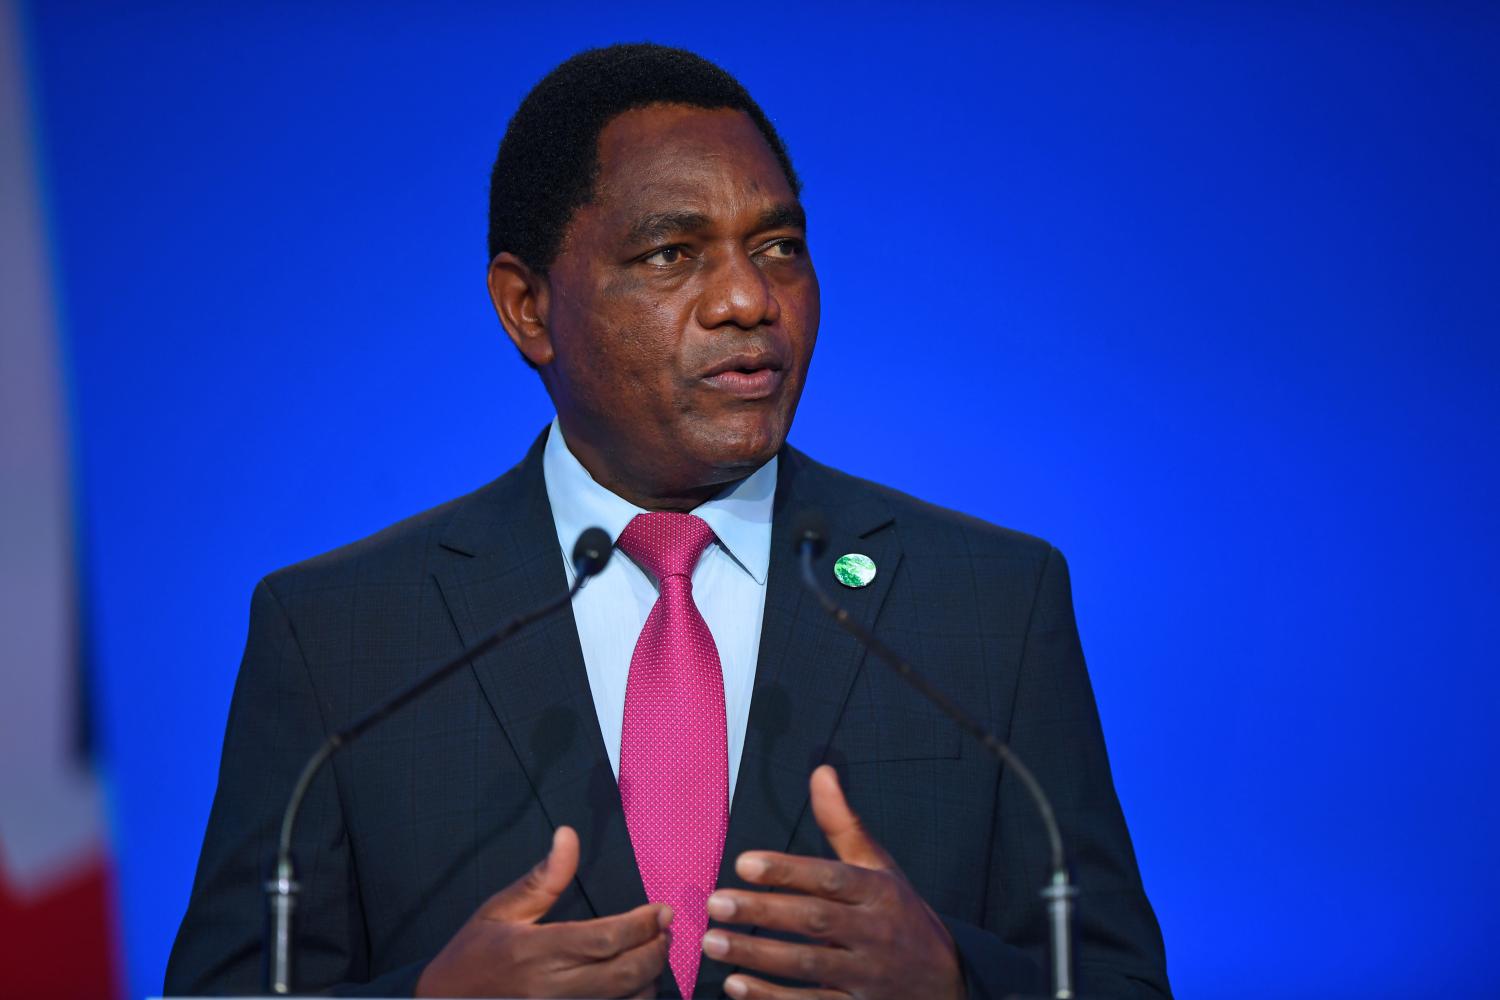 Zambia's President Hakainde Hichilema presents his national statement as a part of the World Leaders' Summit at the UN Climate Change Conference (COP26) in Glasgow, Scotland, Britain November 1, 2021. Andy Buchanan/Pool via REUTERS